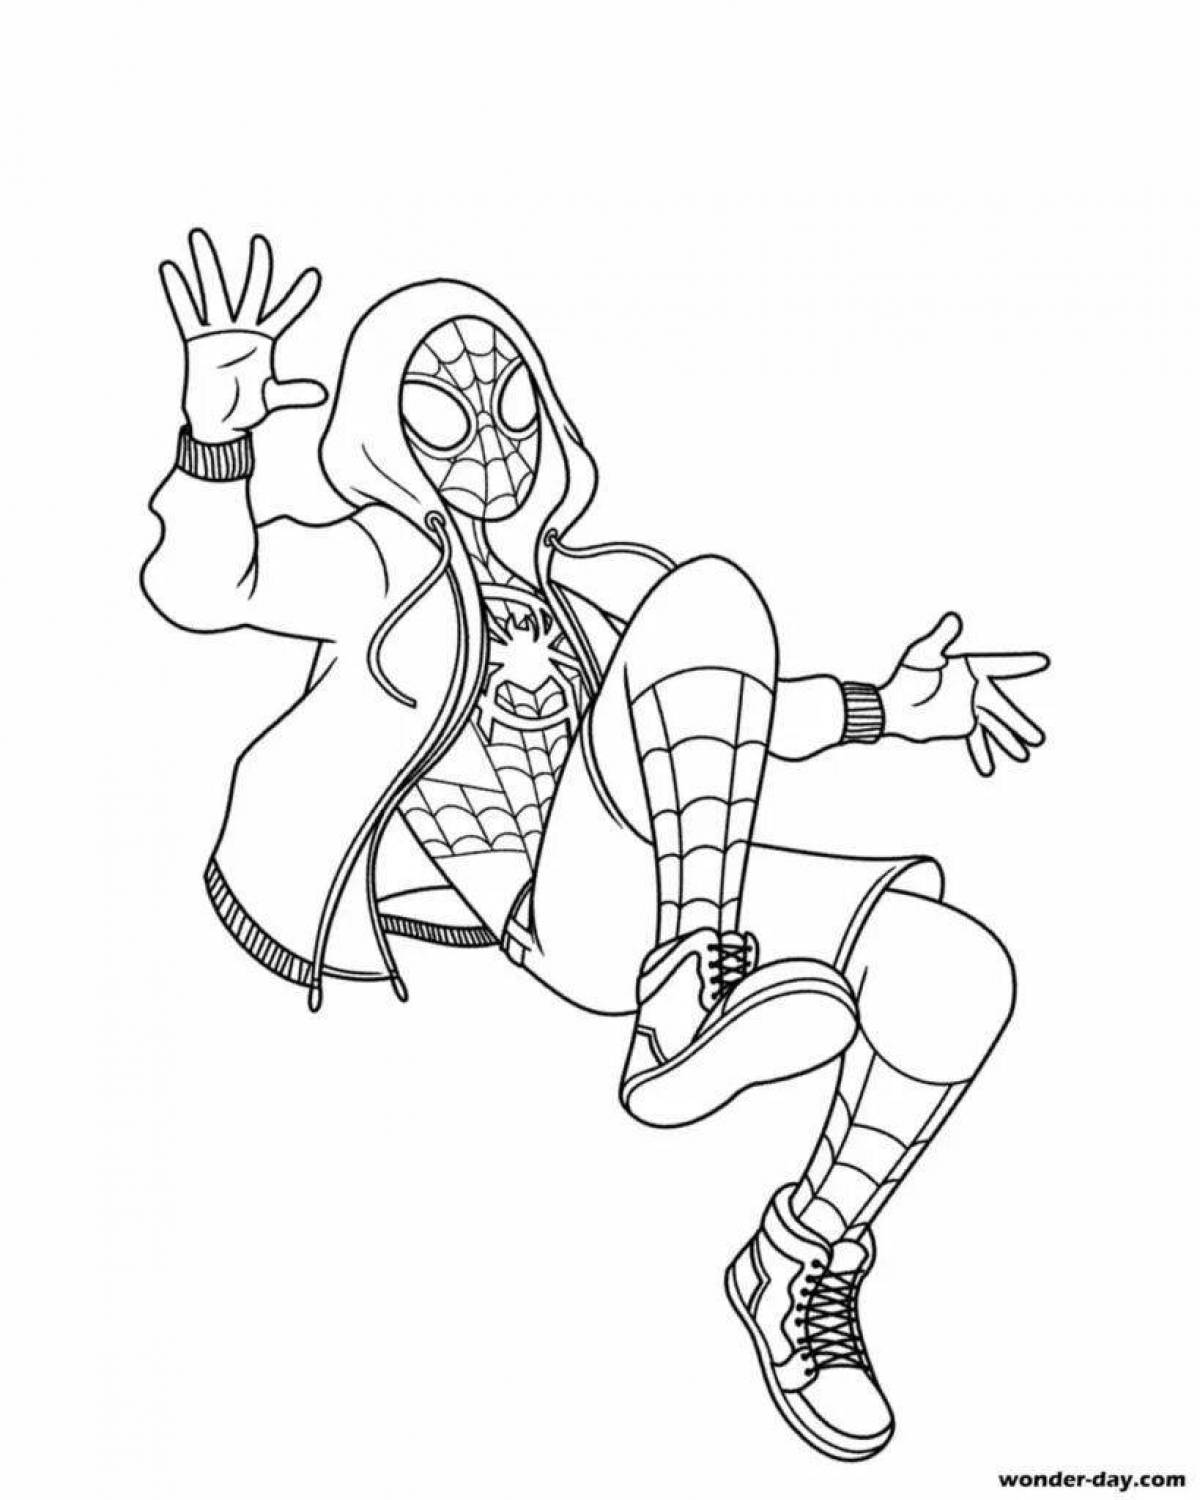 Coloring page shocking ghost of spiderman